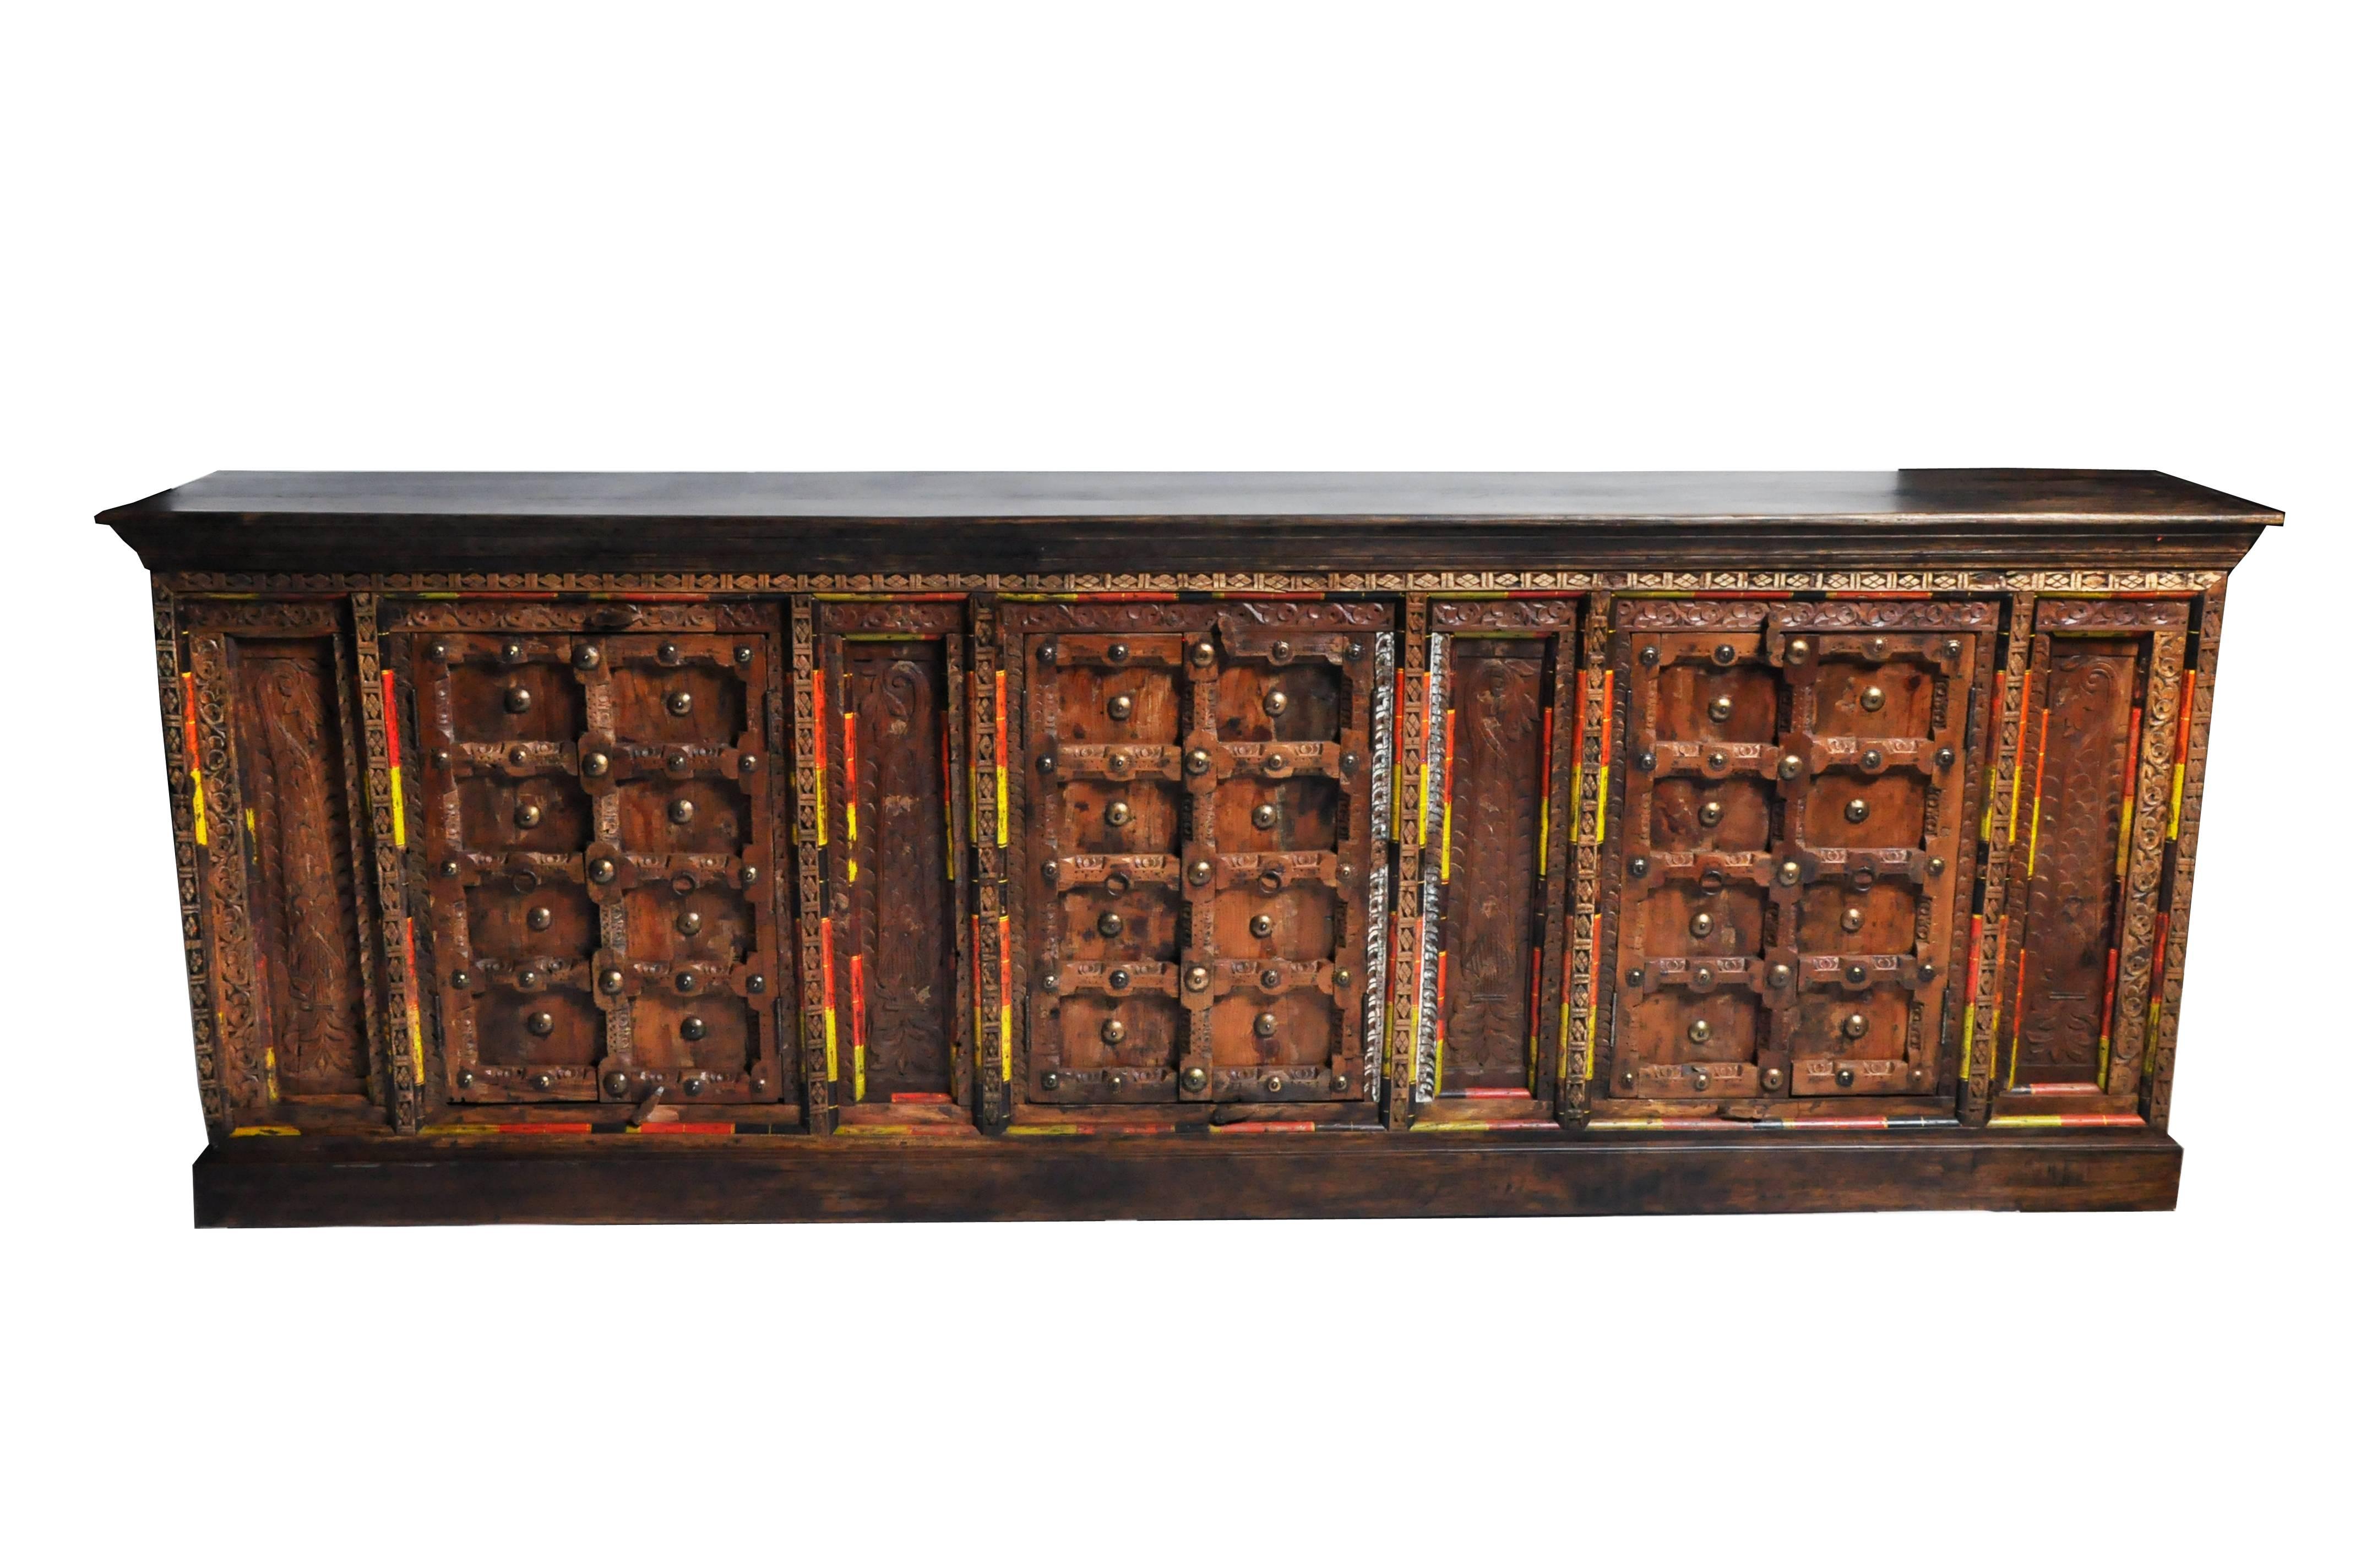 20th Century Impressive Indian Sideboard with Beautiful Colors and Carvings